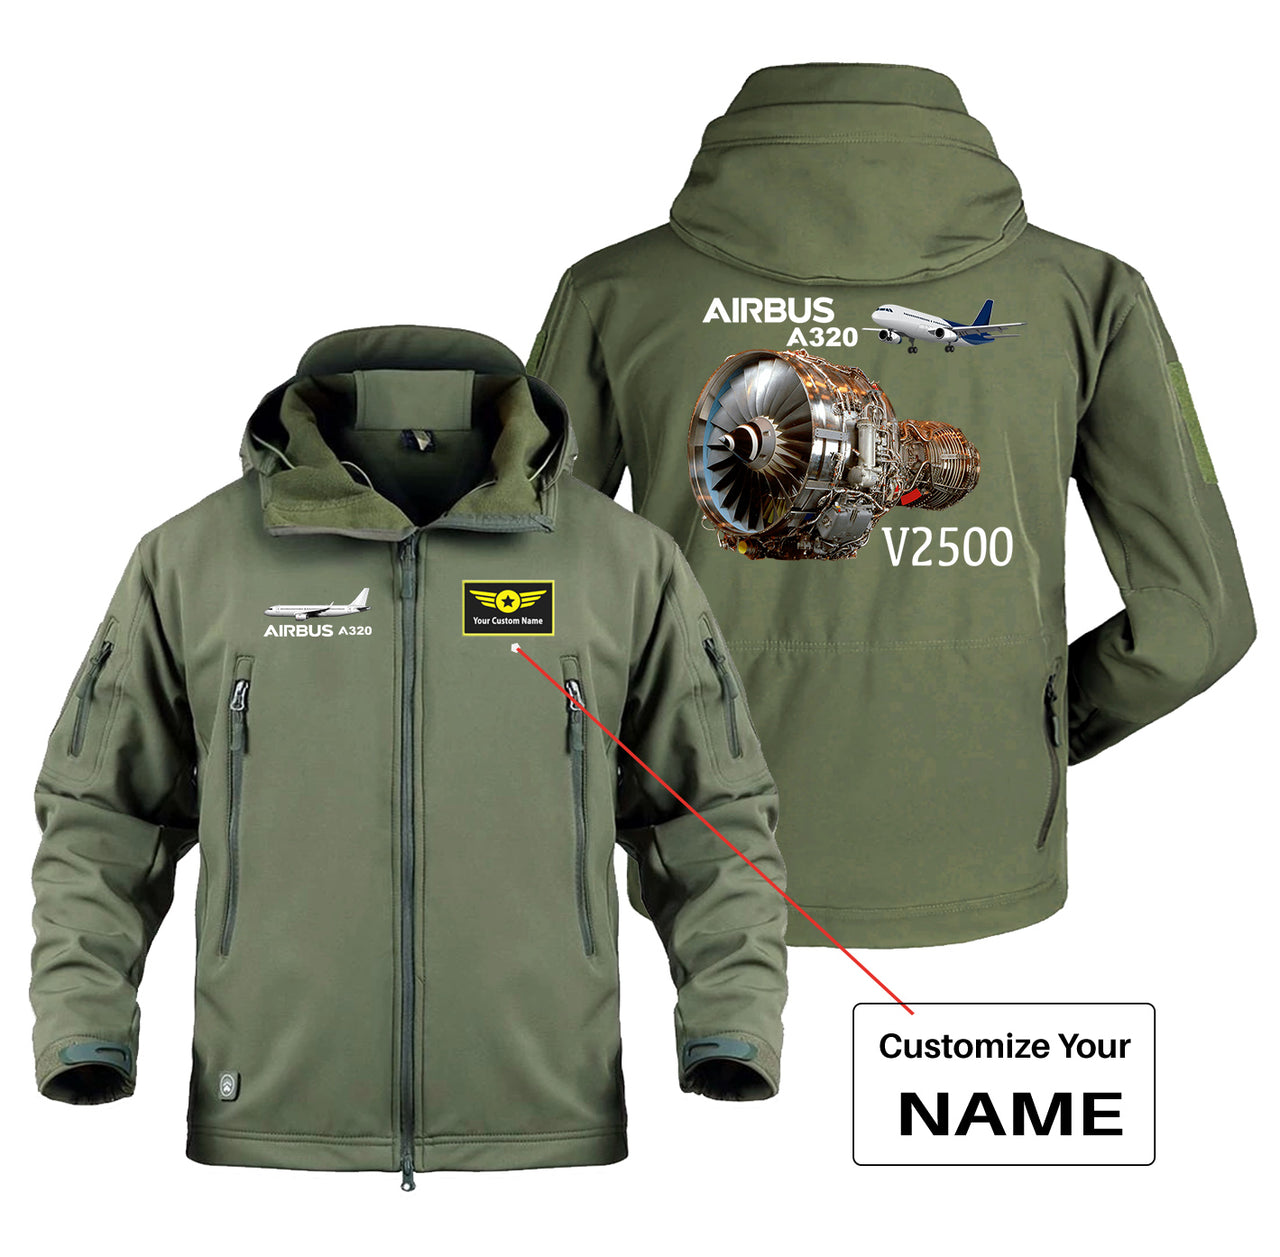 Airbus A320 & V2500 Engine Designed Military Jackets (Customizable)